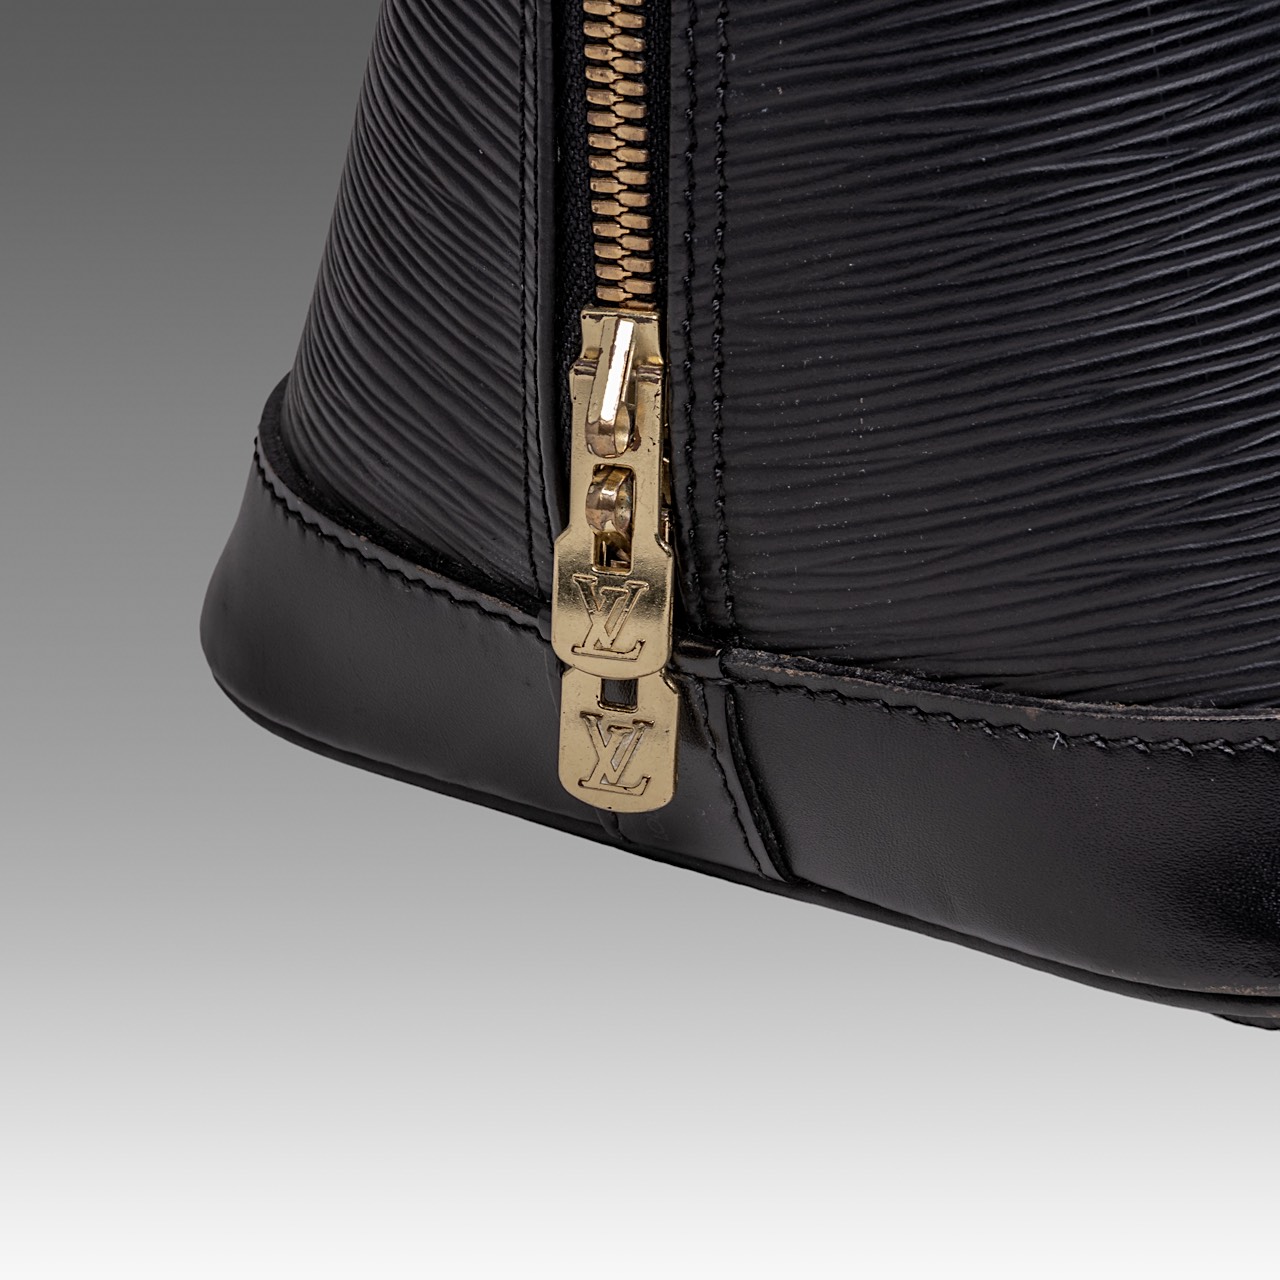 Two various Louis Vuitton handbags in black epi leather - Image 19 of 22